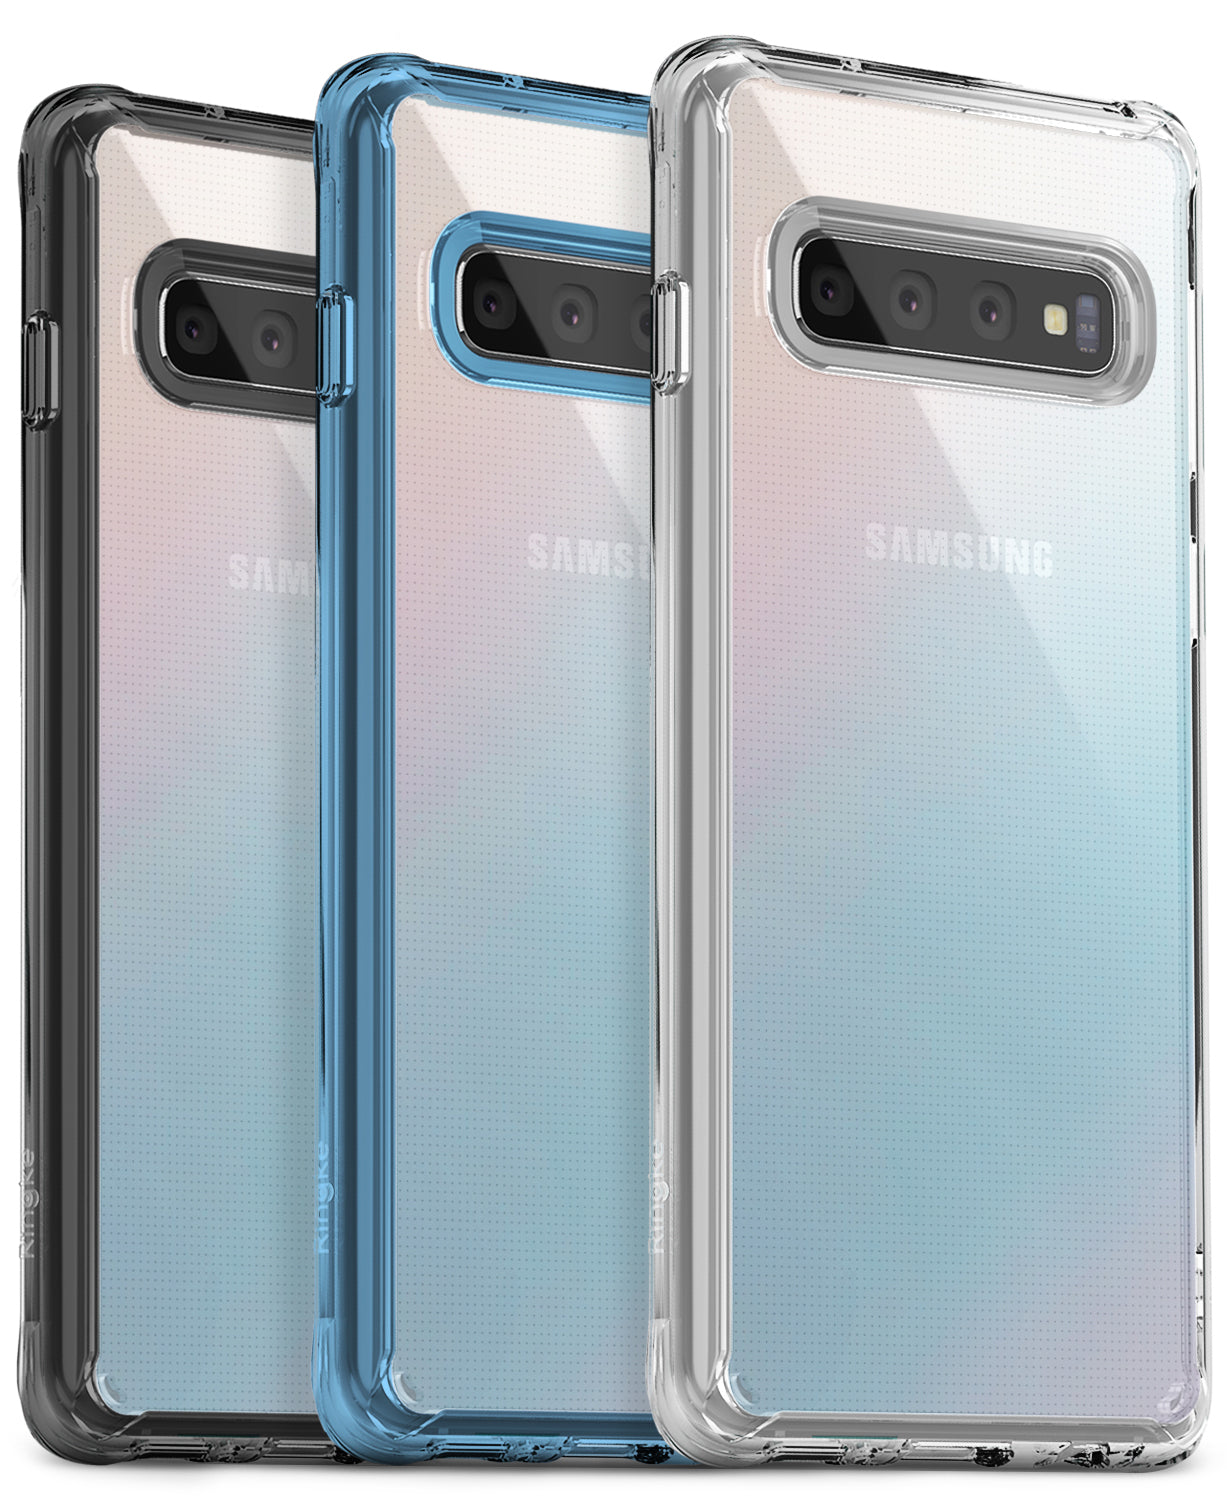 ringke fusion case for samsung galaxy s10 plus